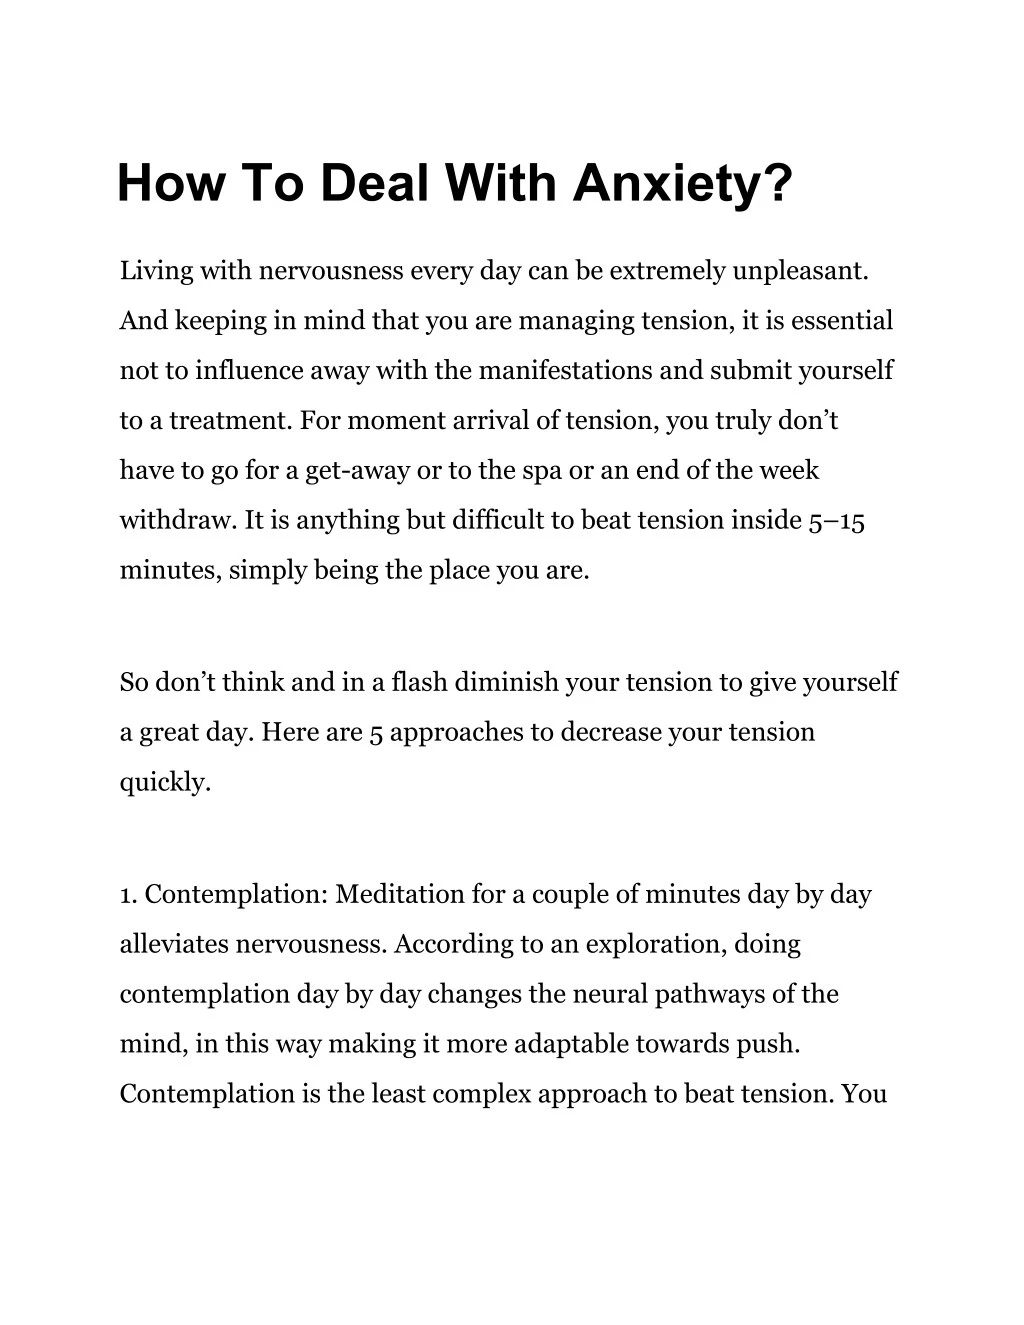 how to deal with anxiety